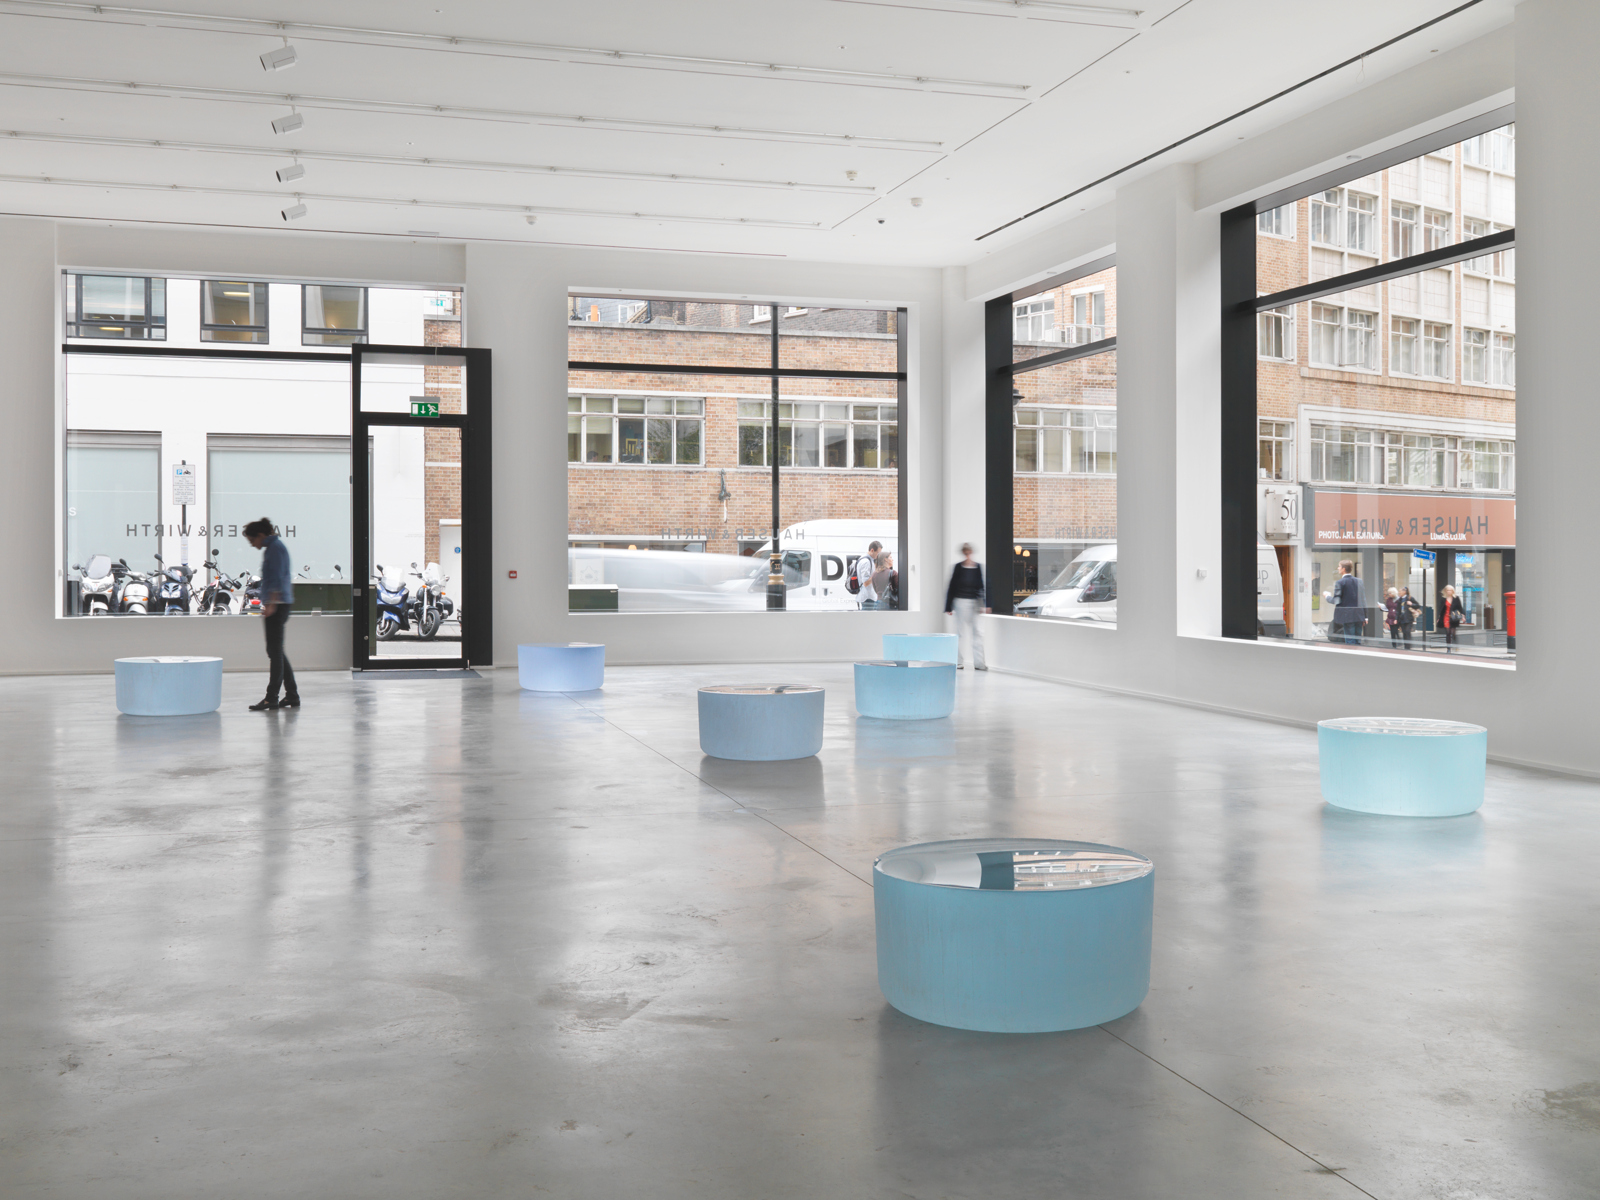 Roni Horn / Well and Truly, installation view, "Recent Work", Hauser & Wirth, London, 2011 / 2009-2010